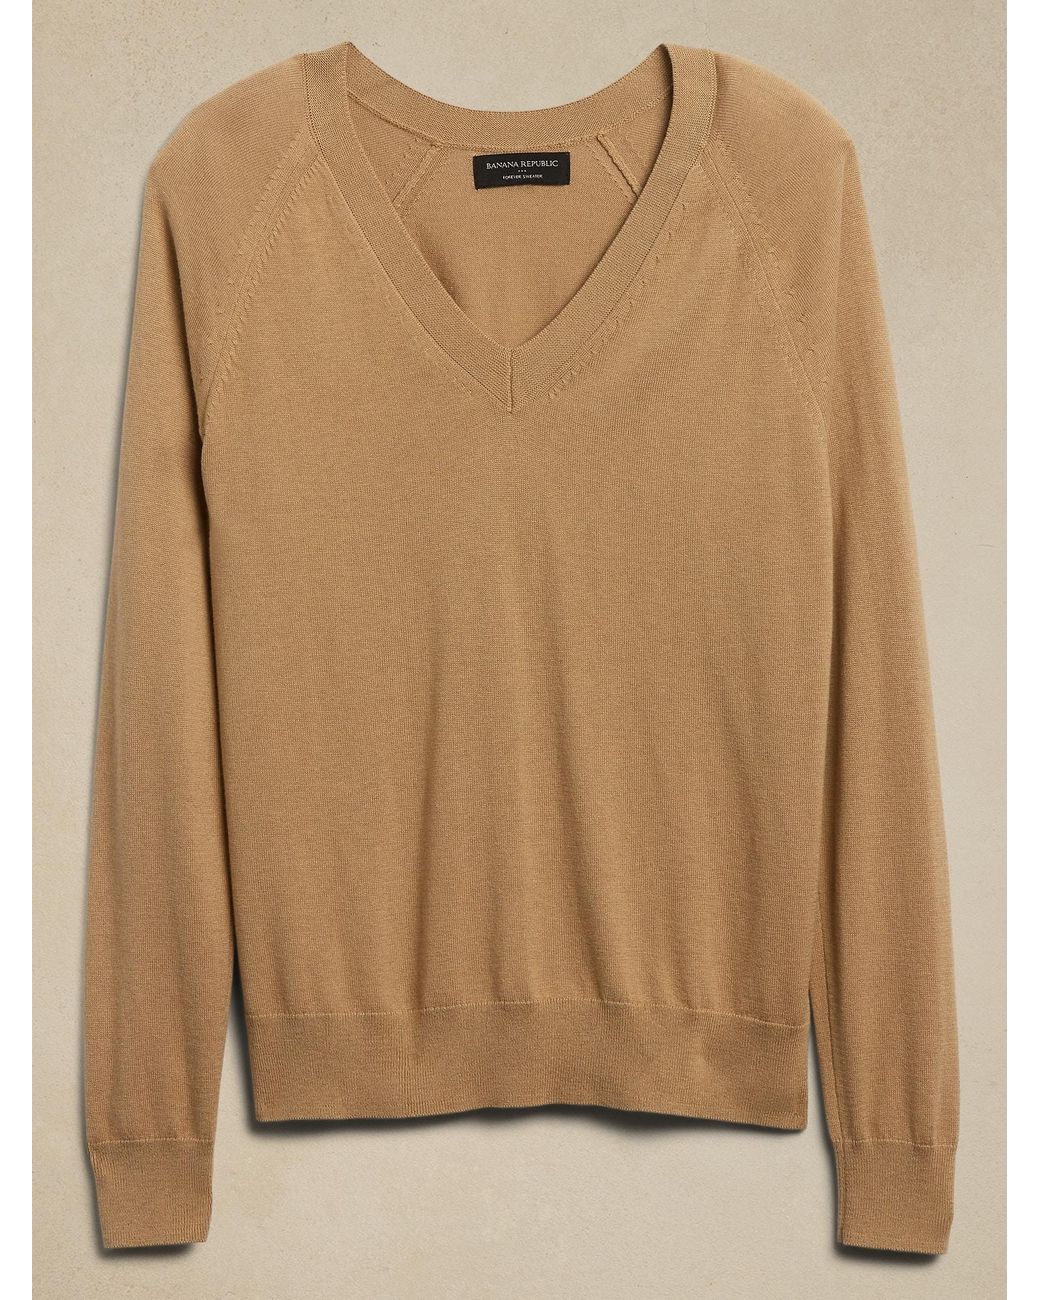 Banana Republic Factory Forever Sweater in Brown | Lyst